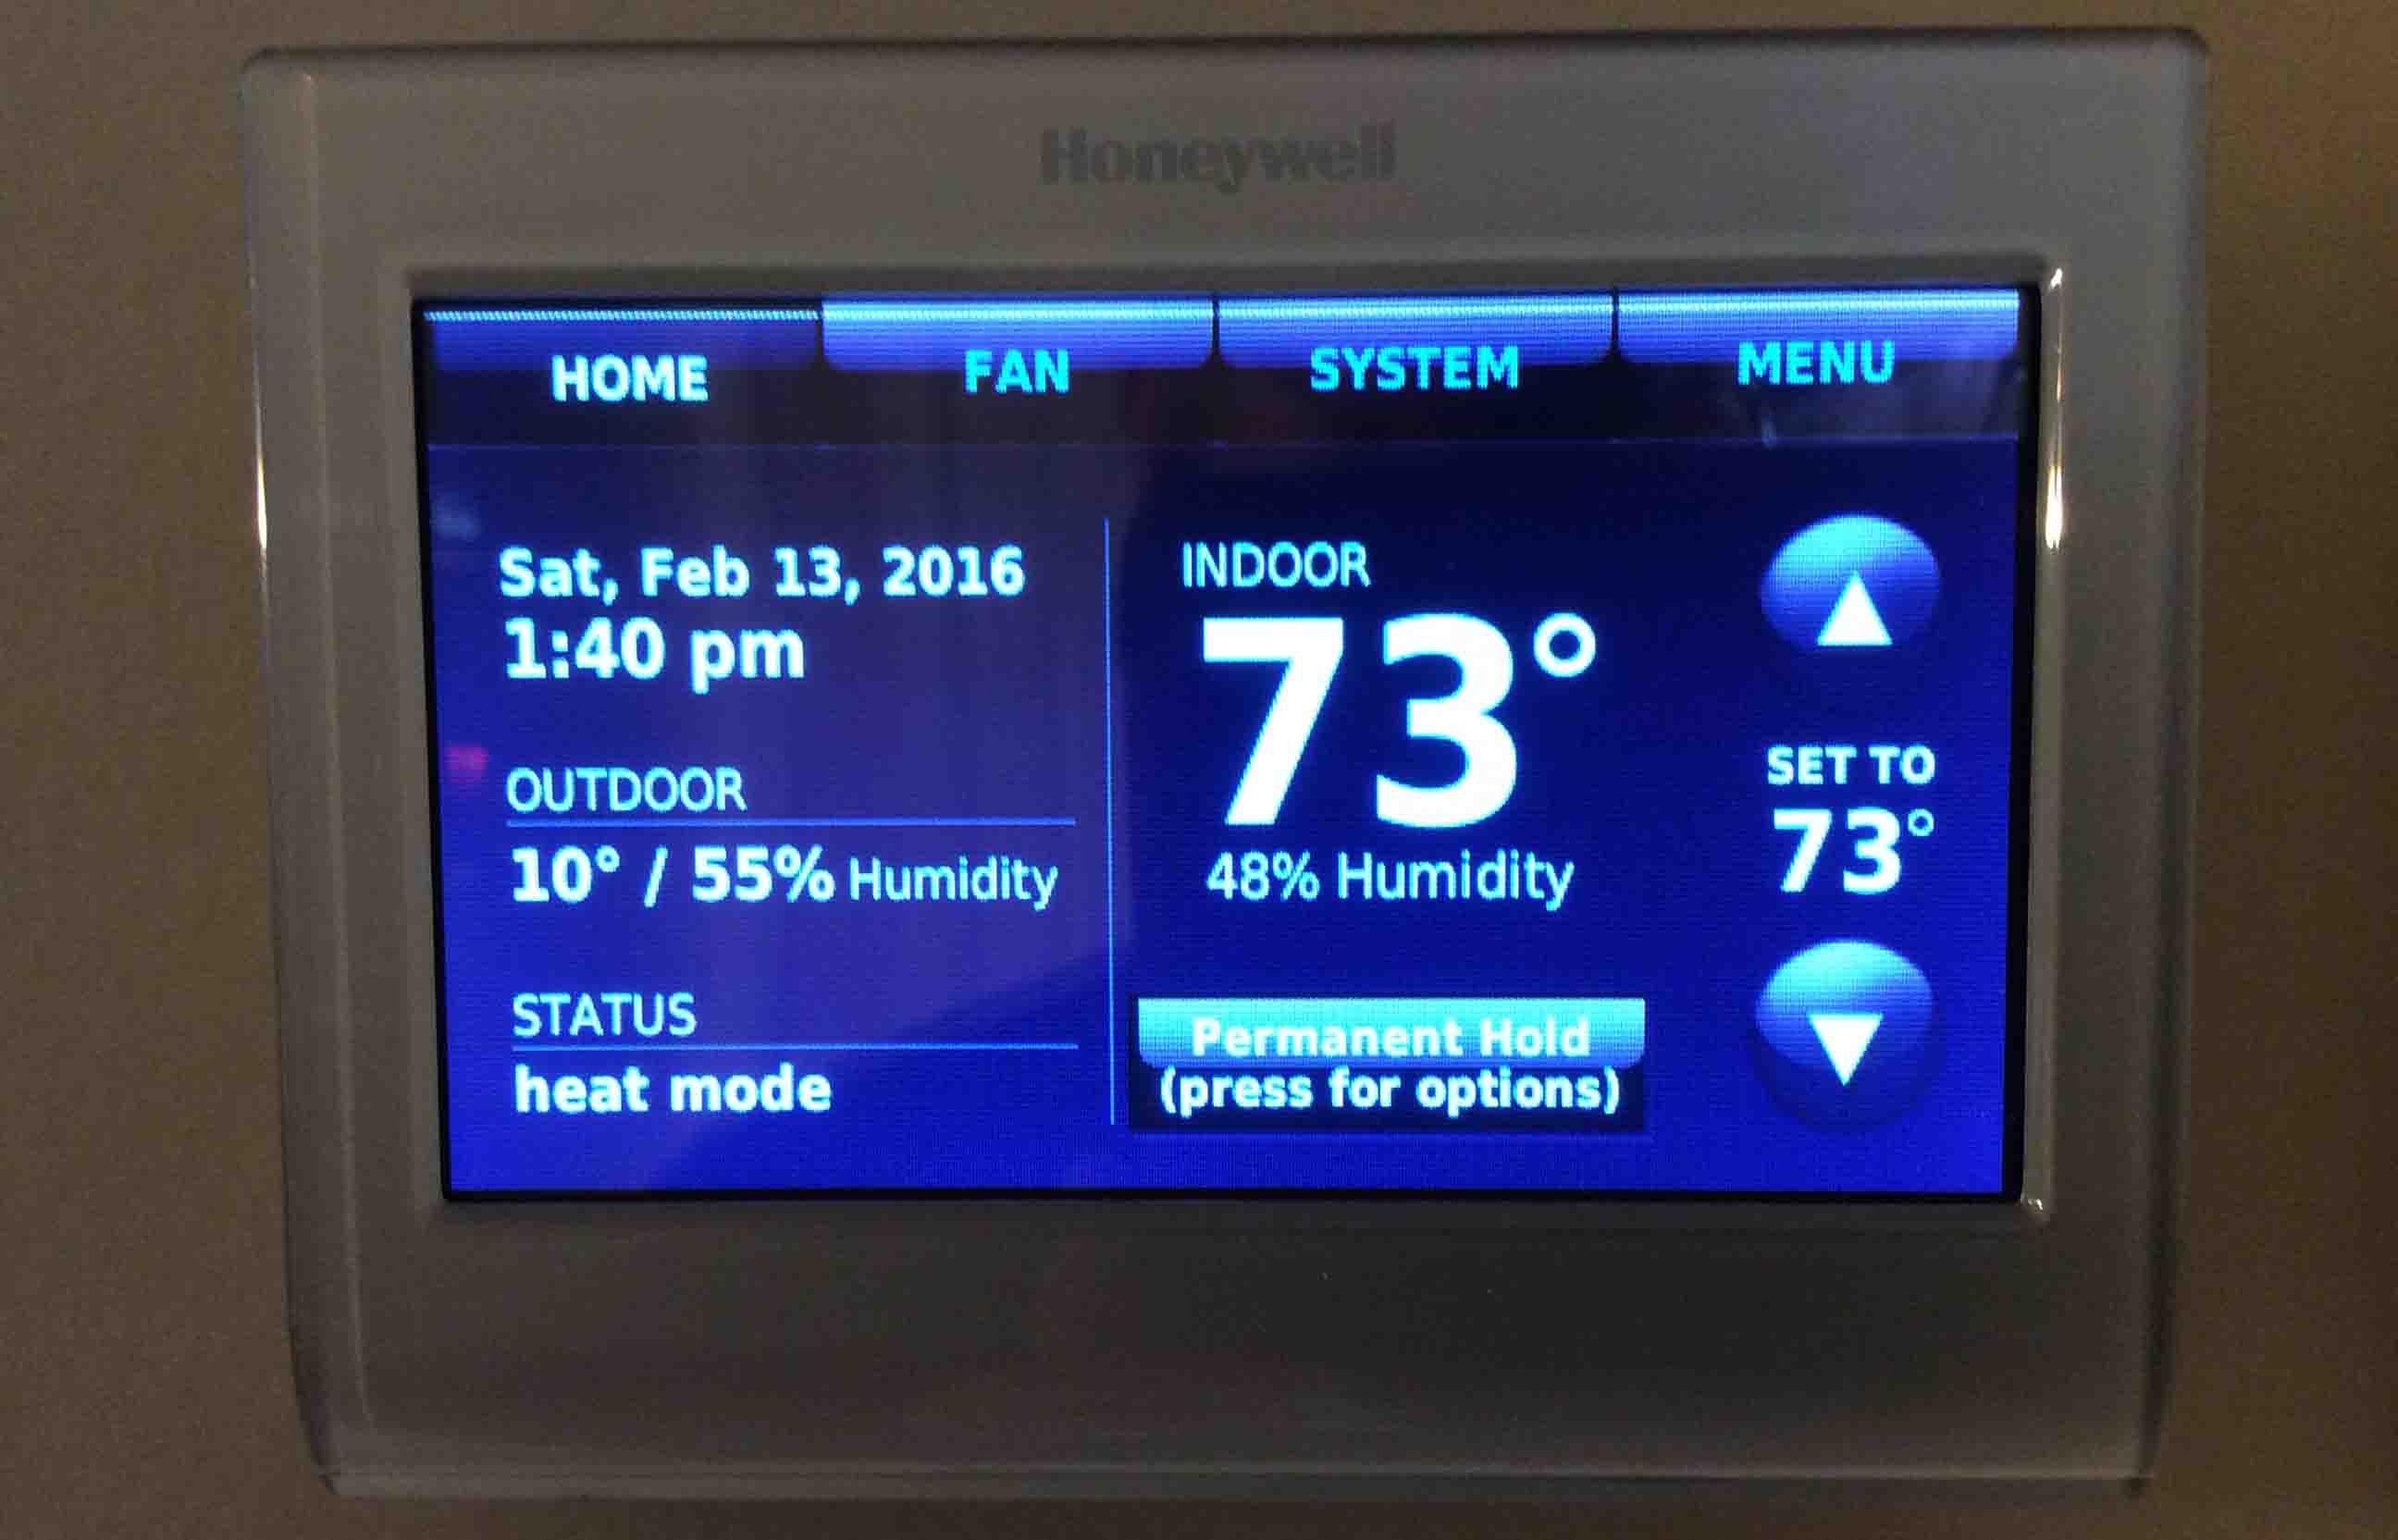 How To Clear Honeywell Thermostat Waiting For Equipment Message On The RTH9580WF Smart Thermostat